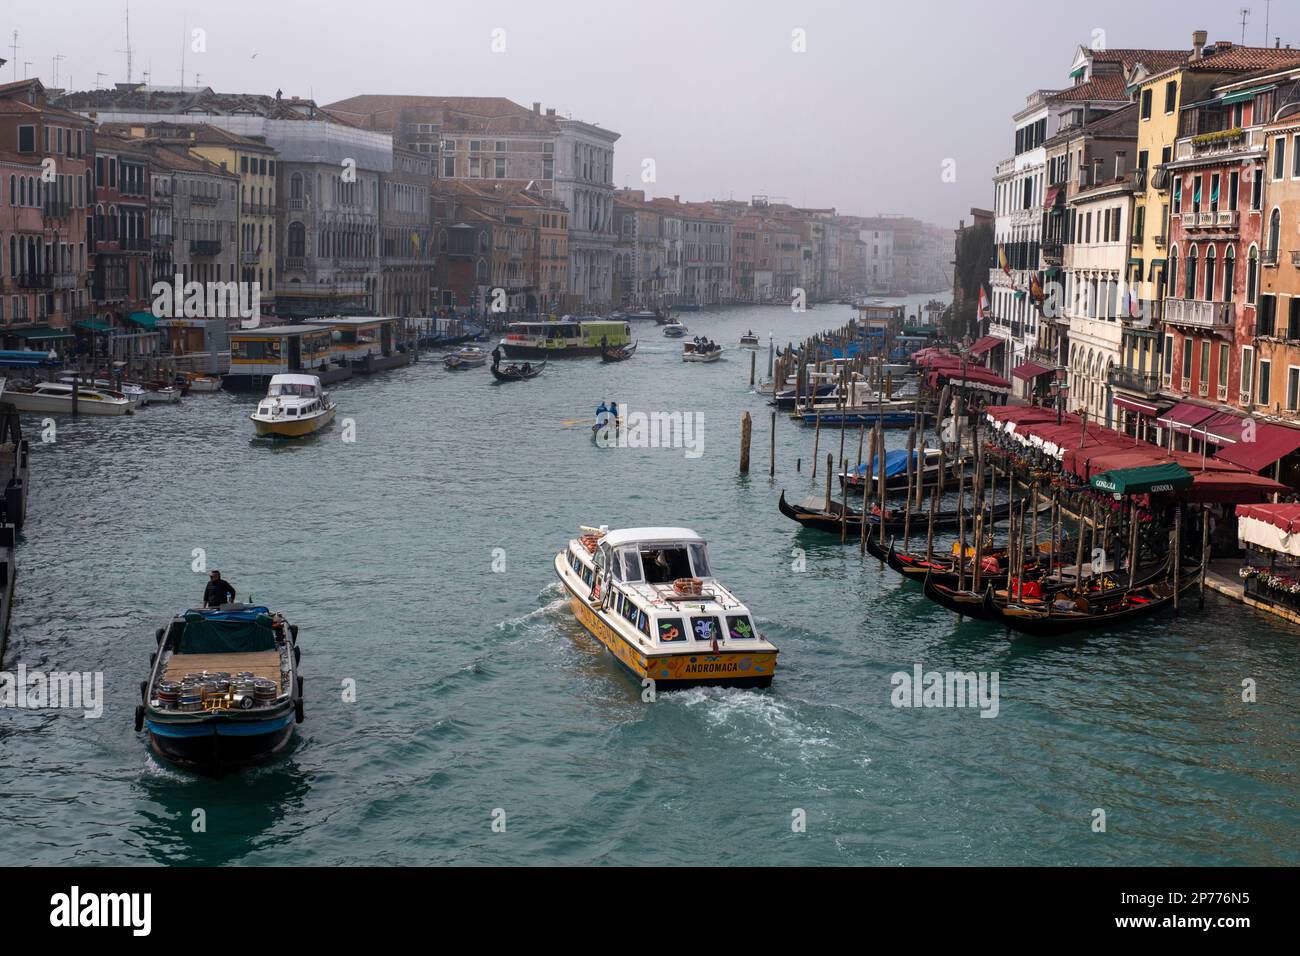 View of the Grand Canal from the Fondaco dei Tedeschi terrace, Venice, Italy. Stock Photo